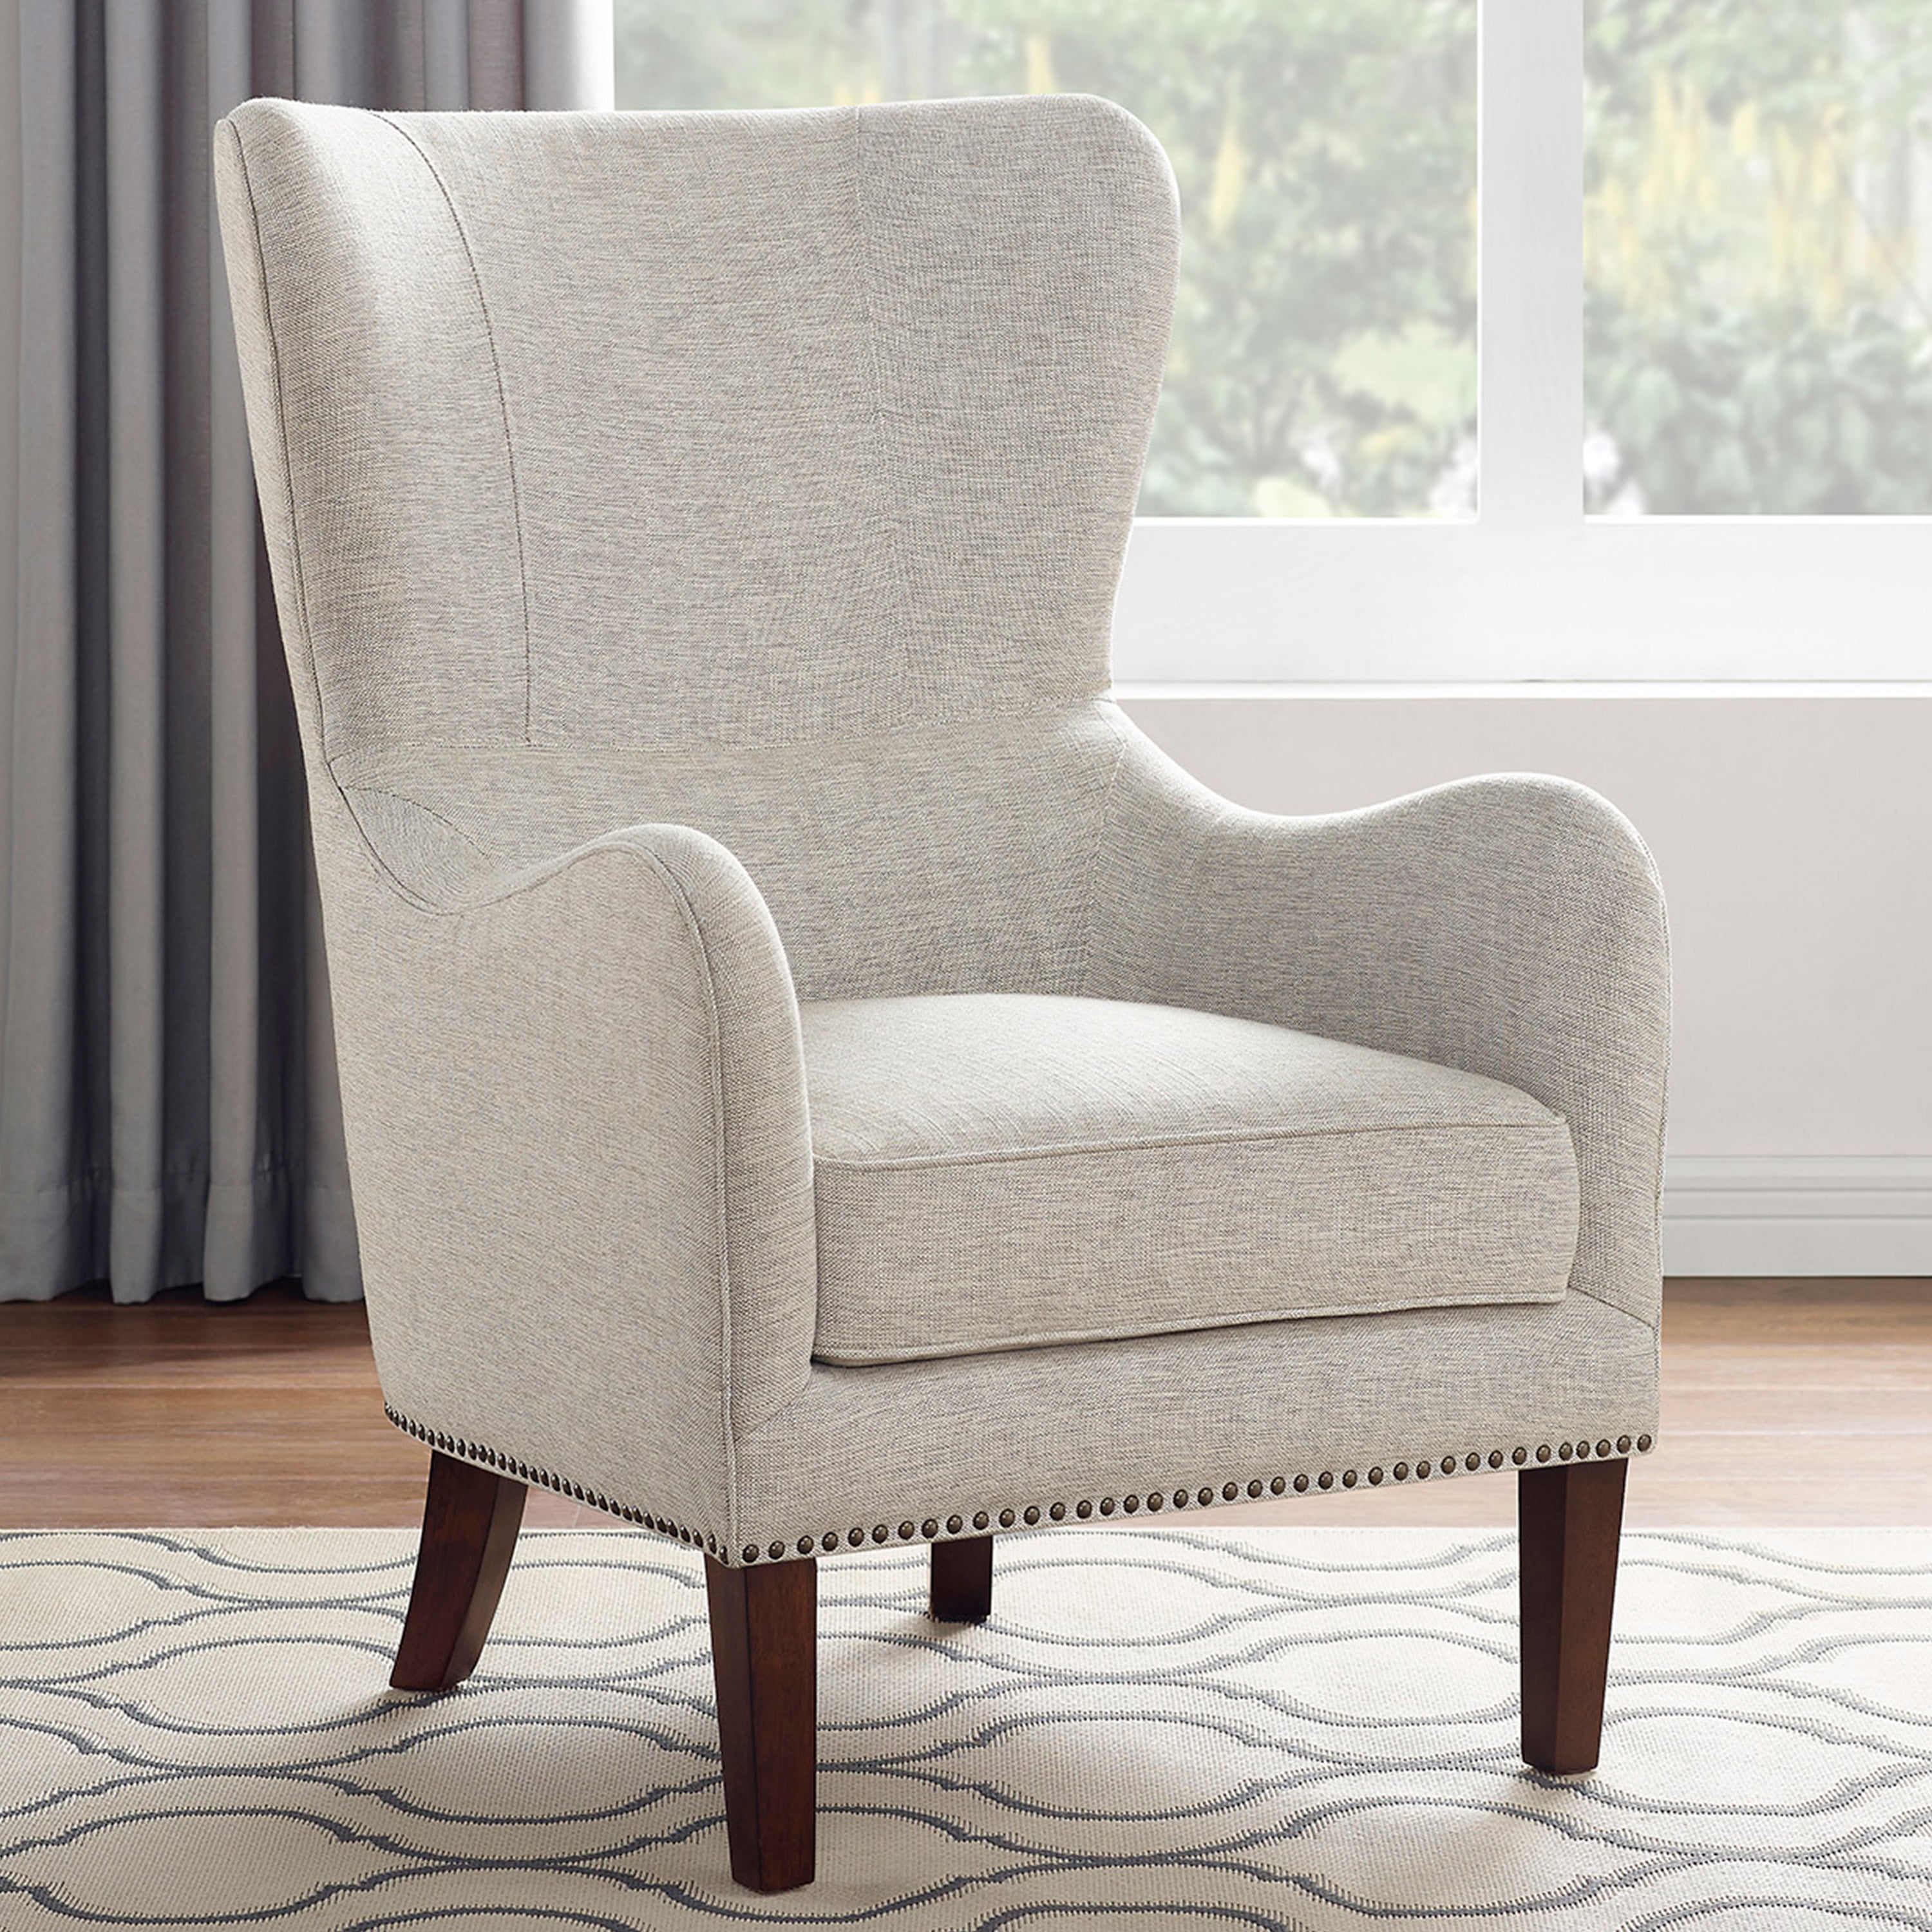 Serta Wingback Accent Arm Chair, 225 lbs, Beige Fabric Upholstery